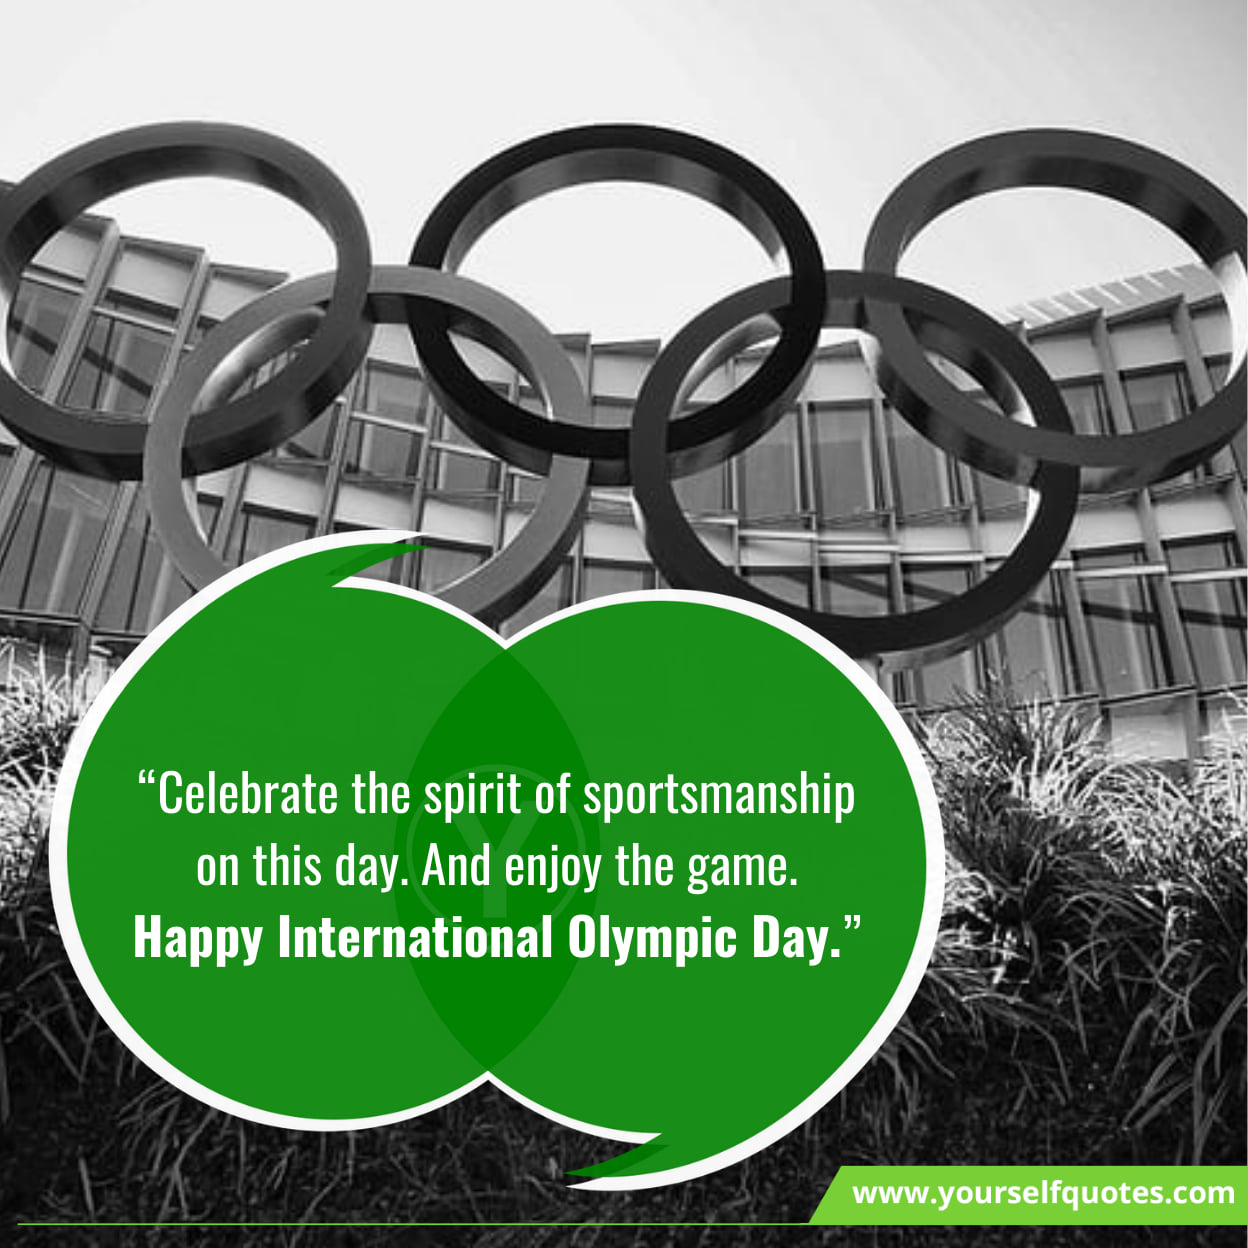 International Olympic Day Wishes